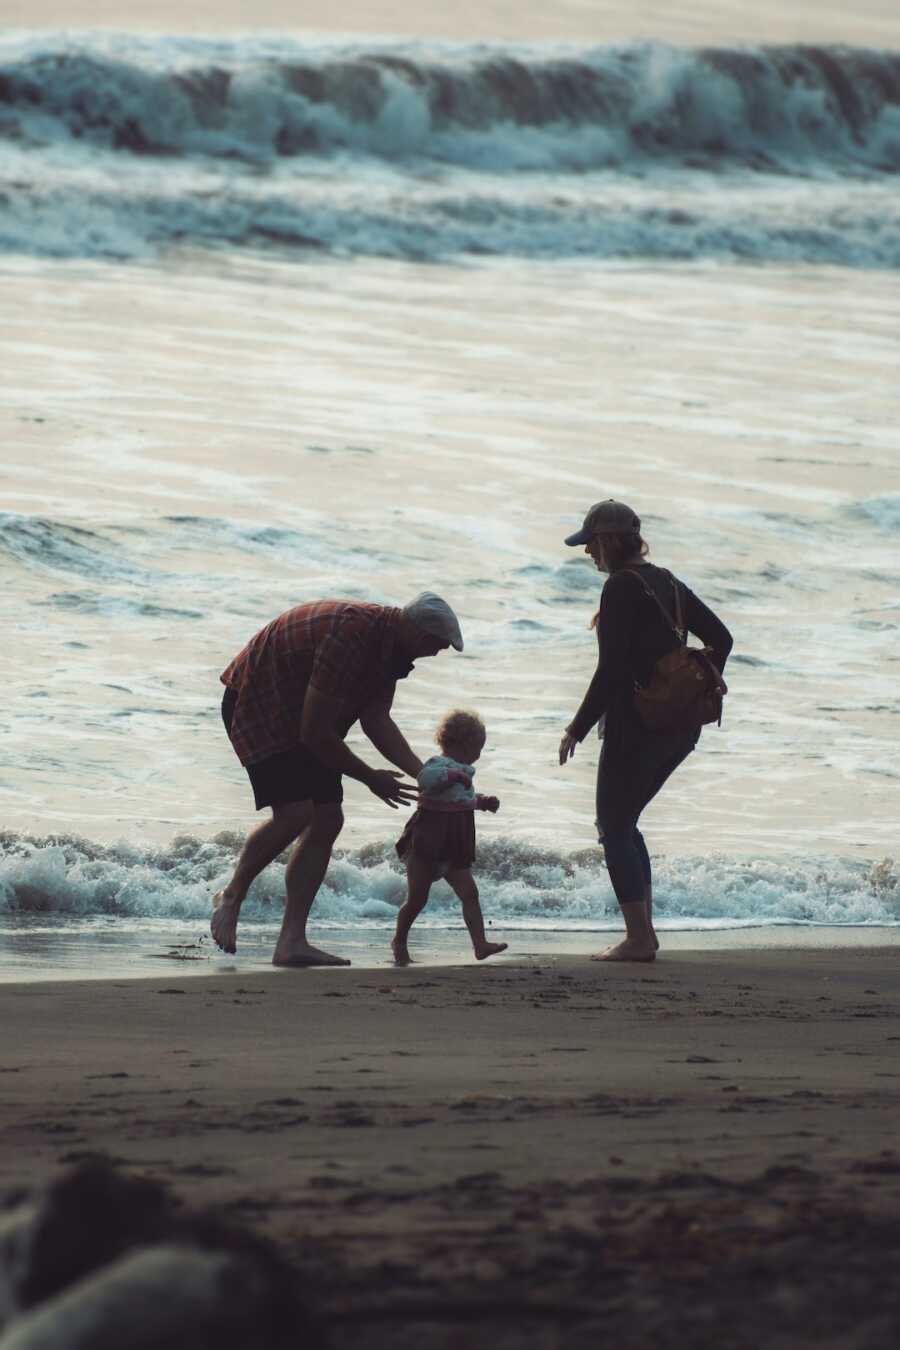 family on the beach, dad goes to hold child, mom stands by